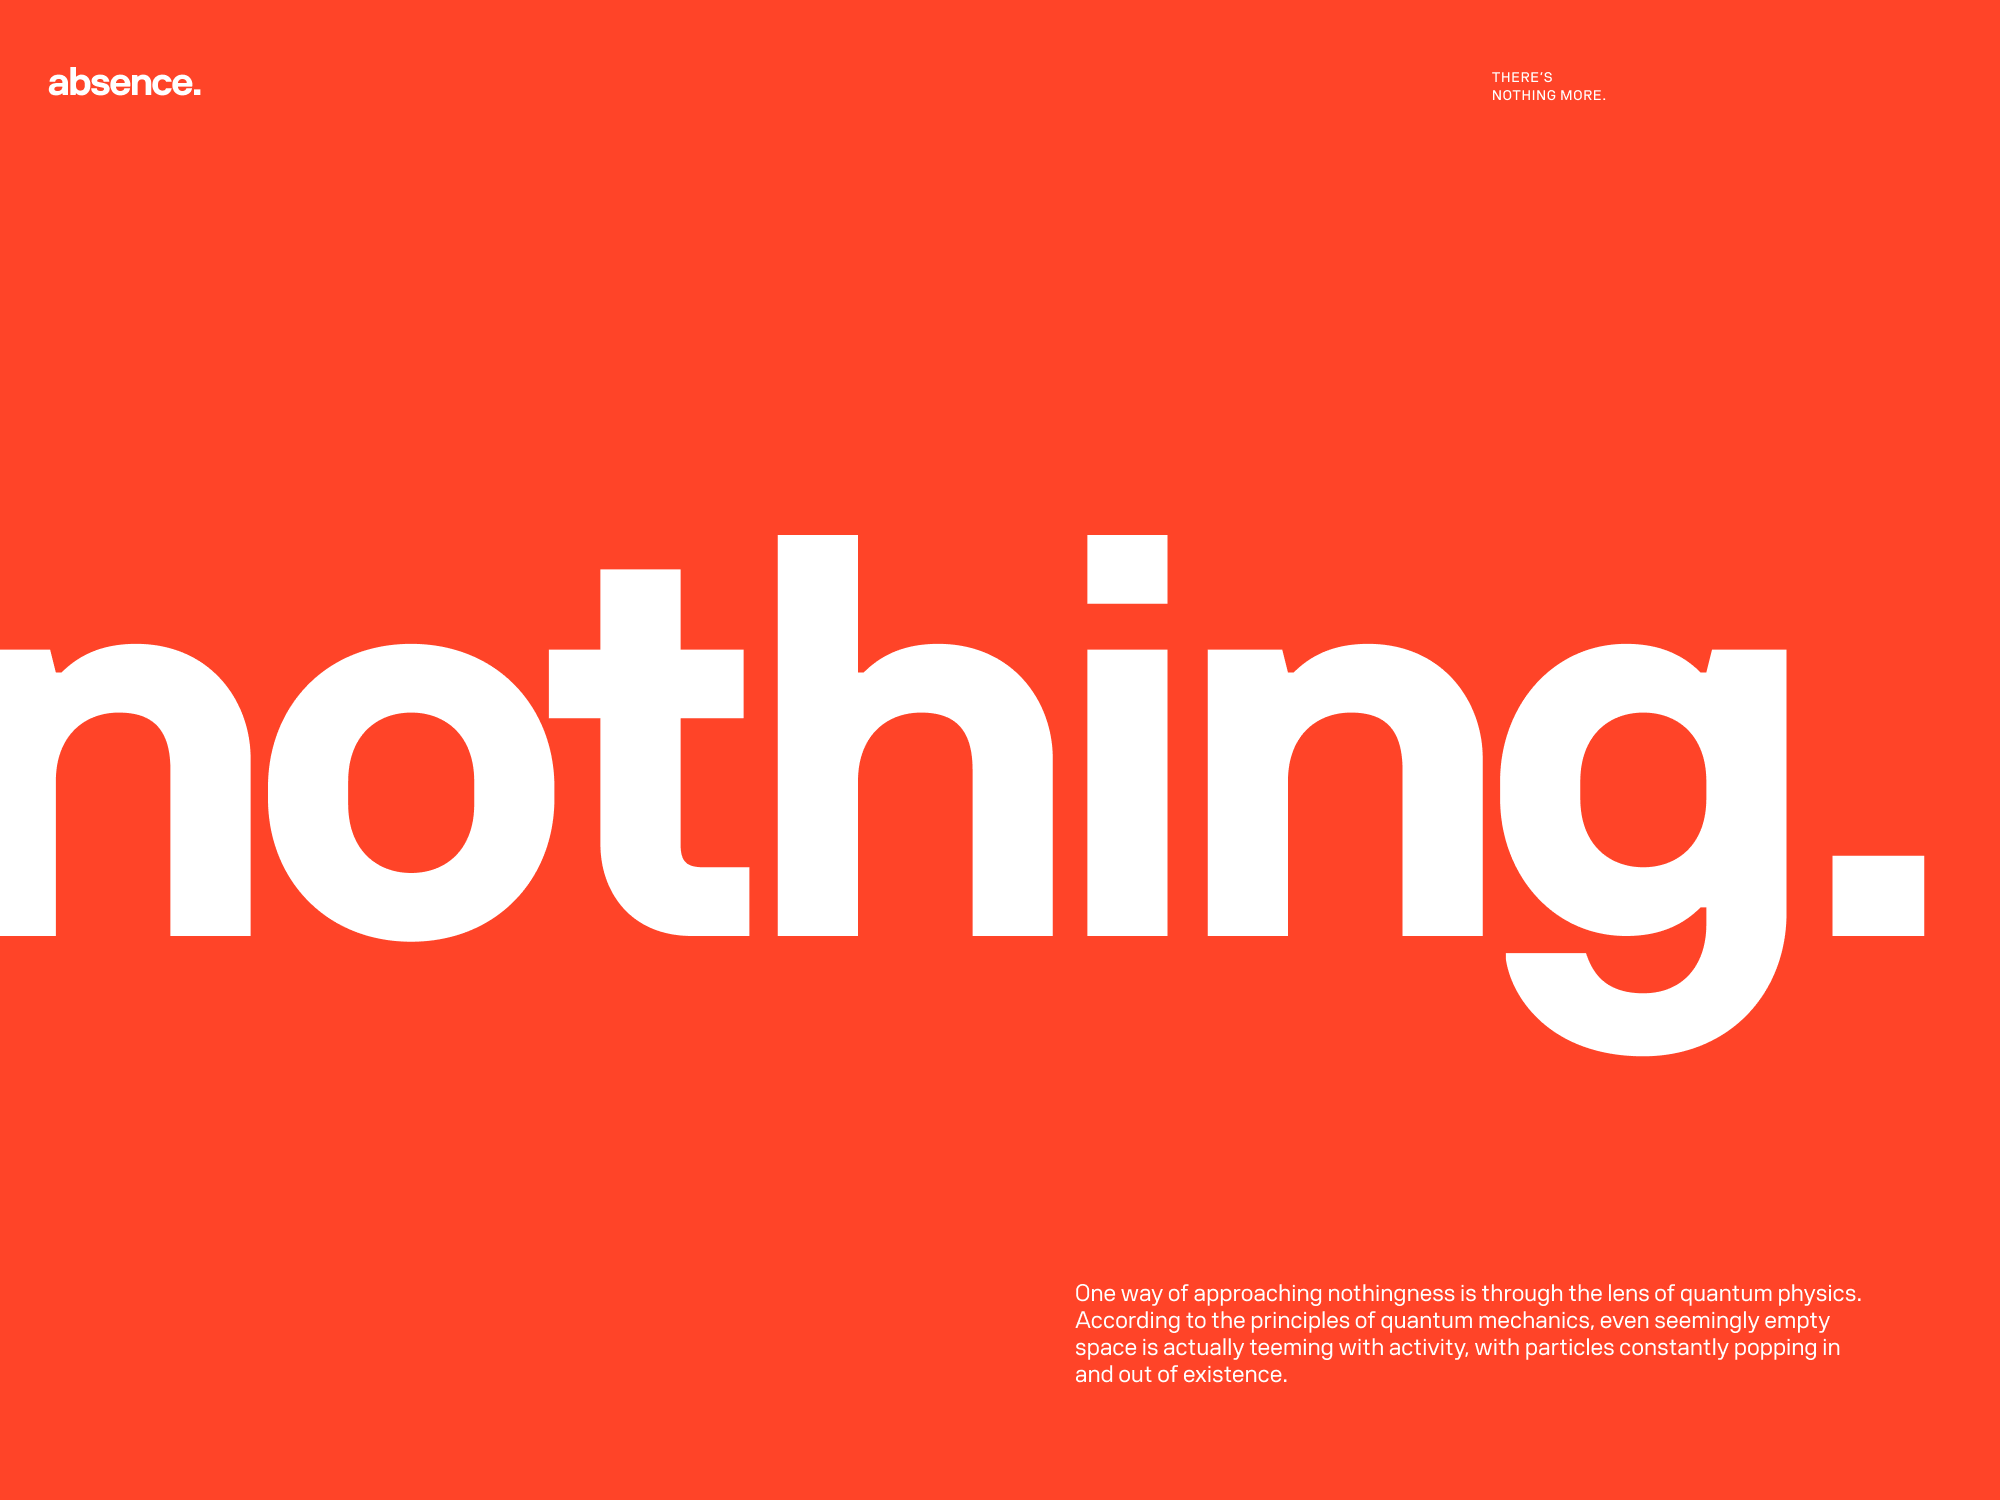 Absence absence bright clean concept design experiment layout minimal minimalistic nothing orange prototyp sans text textual tgif typographic typography ui design volksans